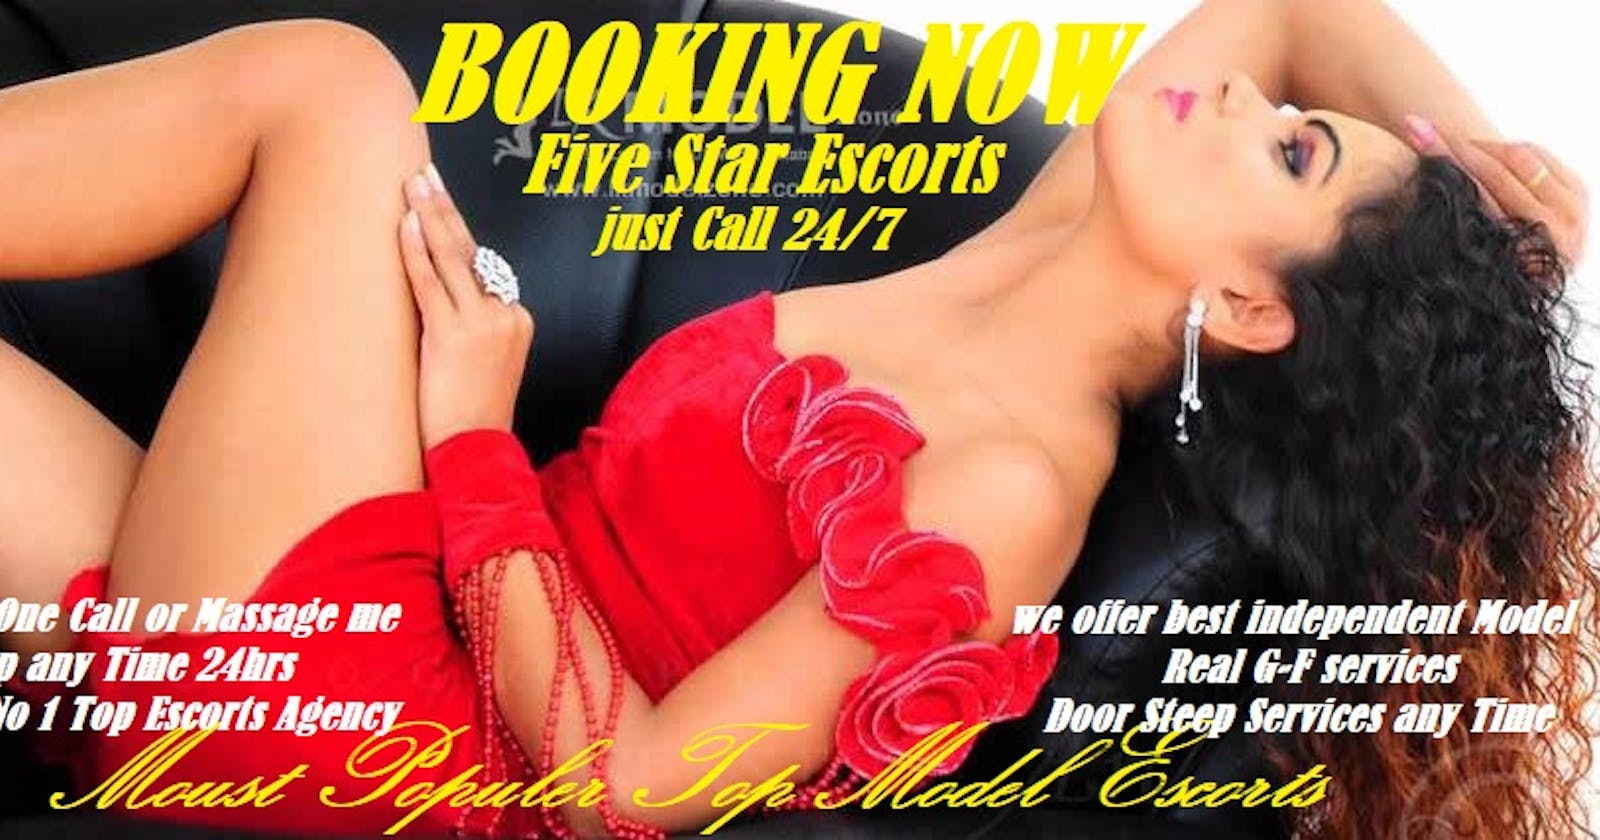 The most effective method to find the best Hyderabad escorts easily